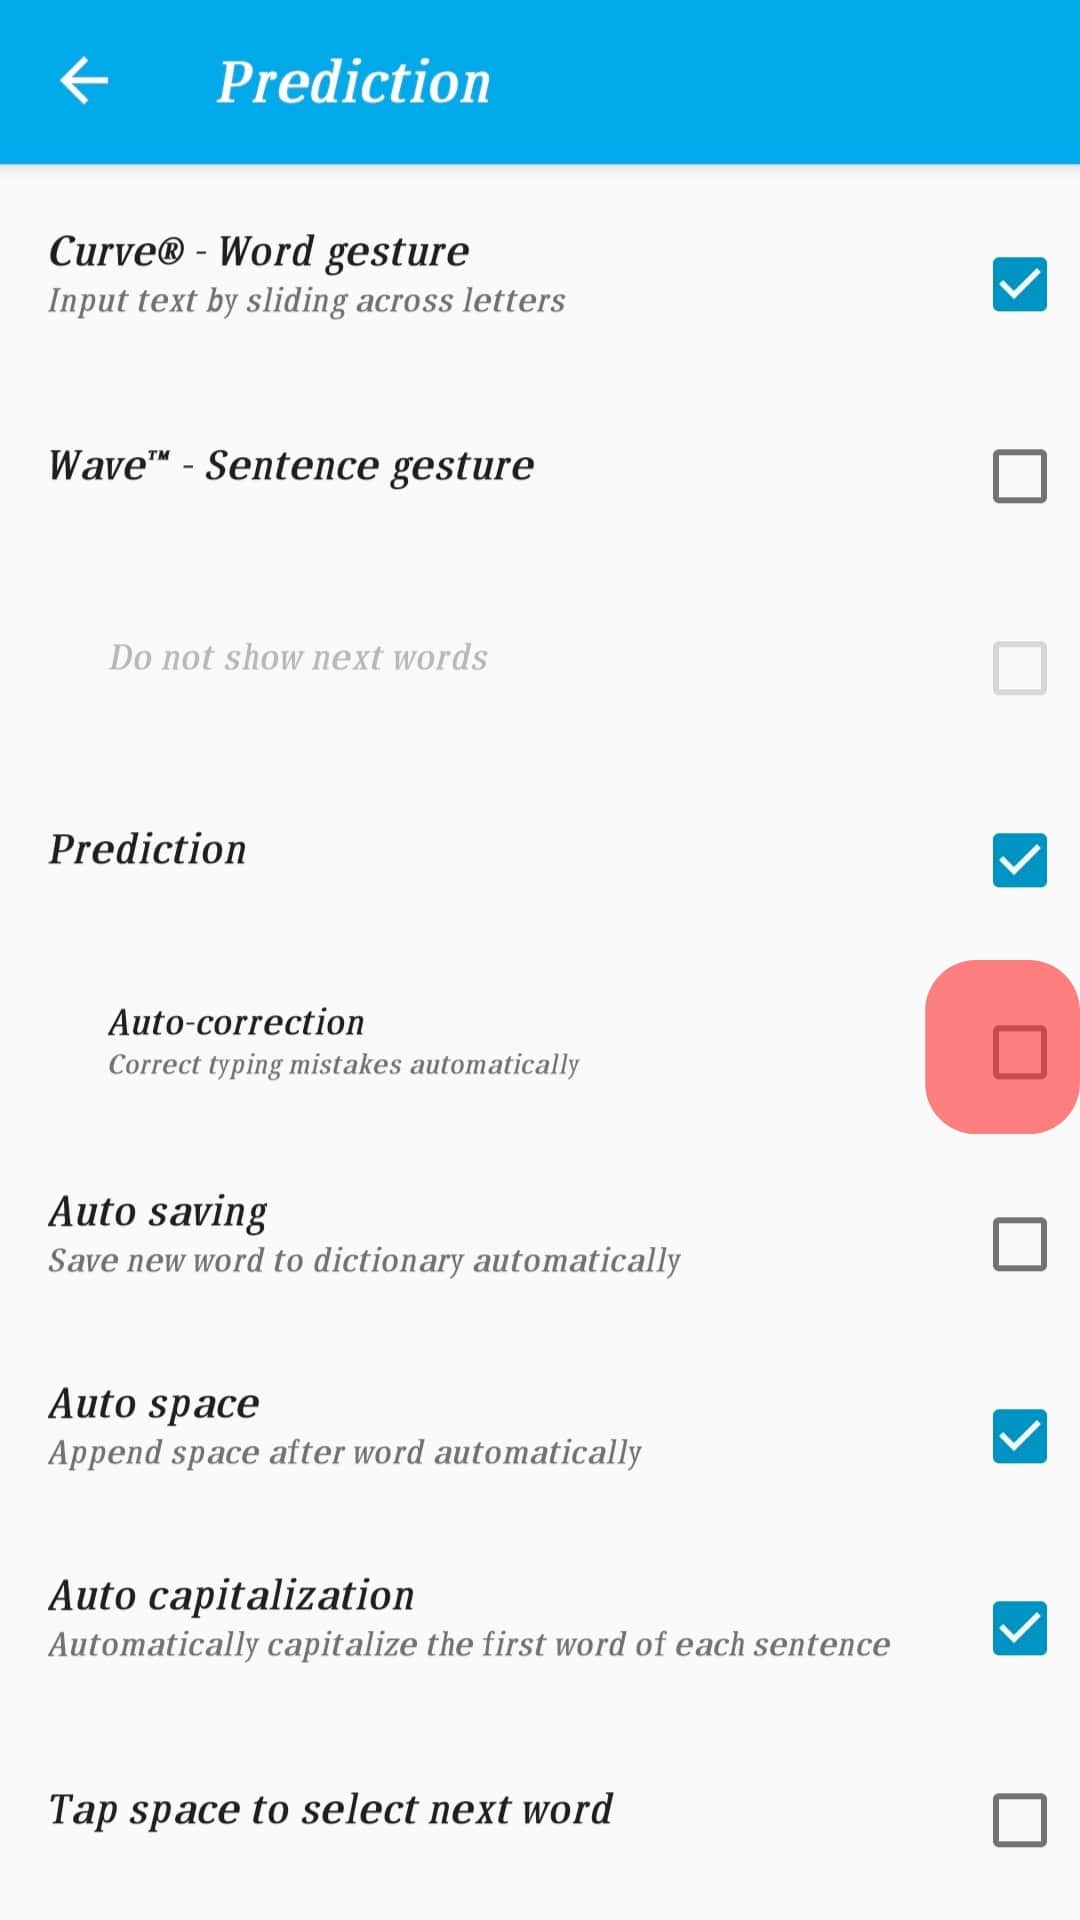 Disable The Switch Next To The Auto-Correction Option